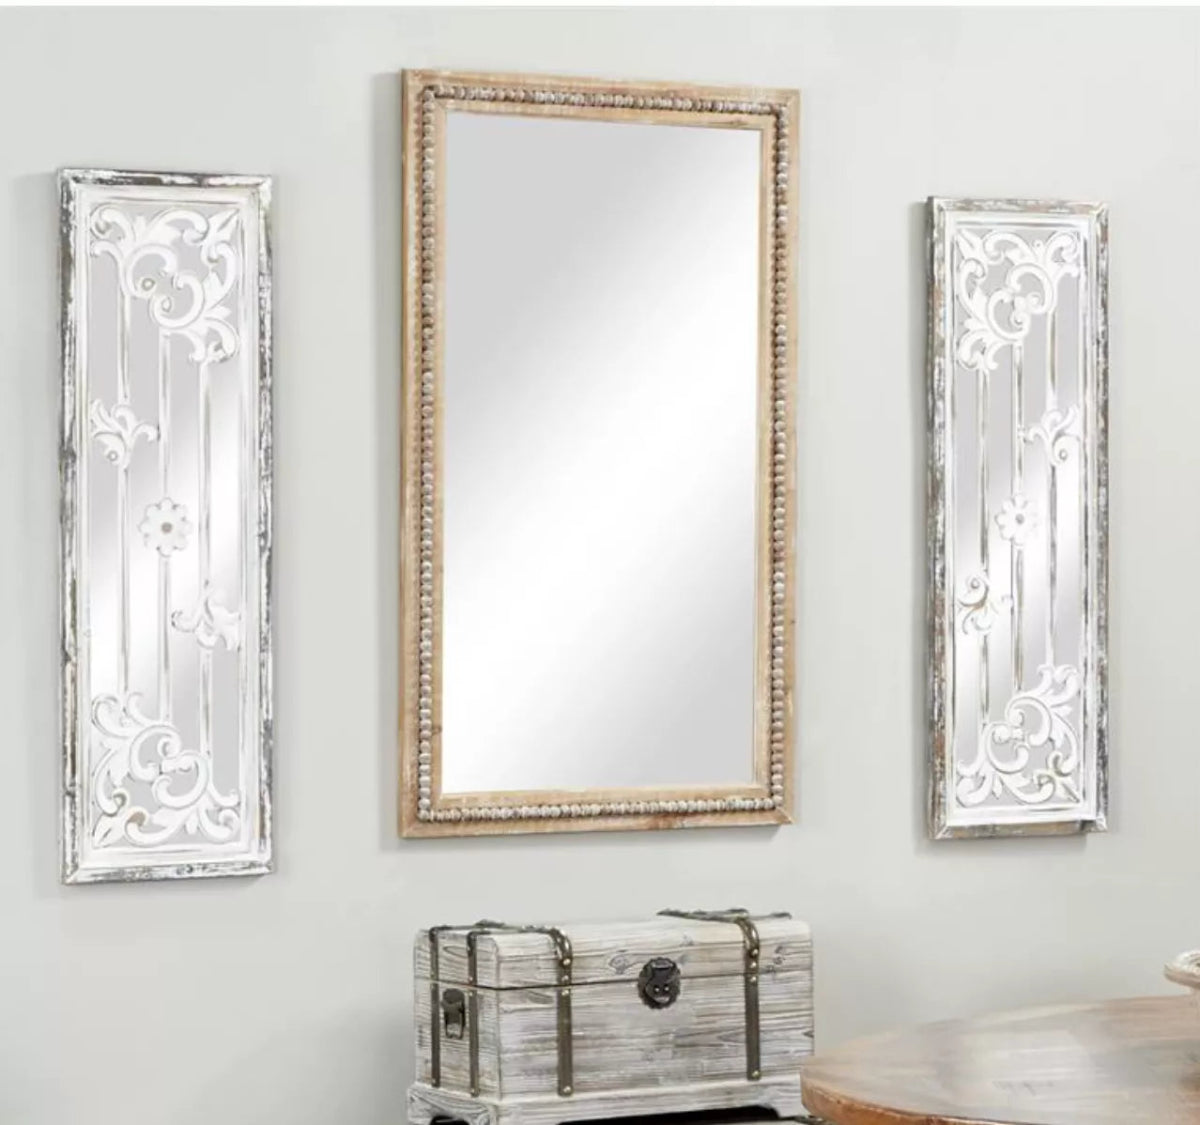 Distressed Wooden Wall Mirror with Beaded Detailing, 28" x 48"